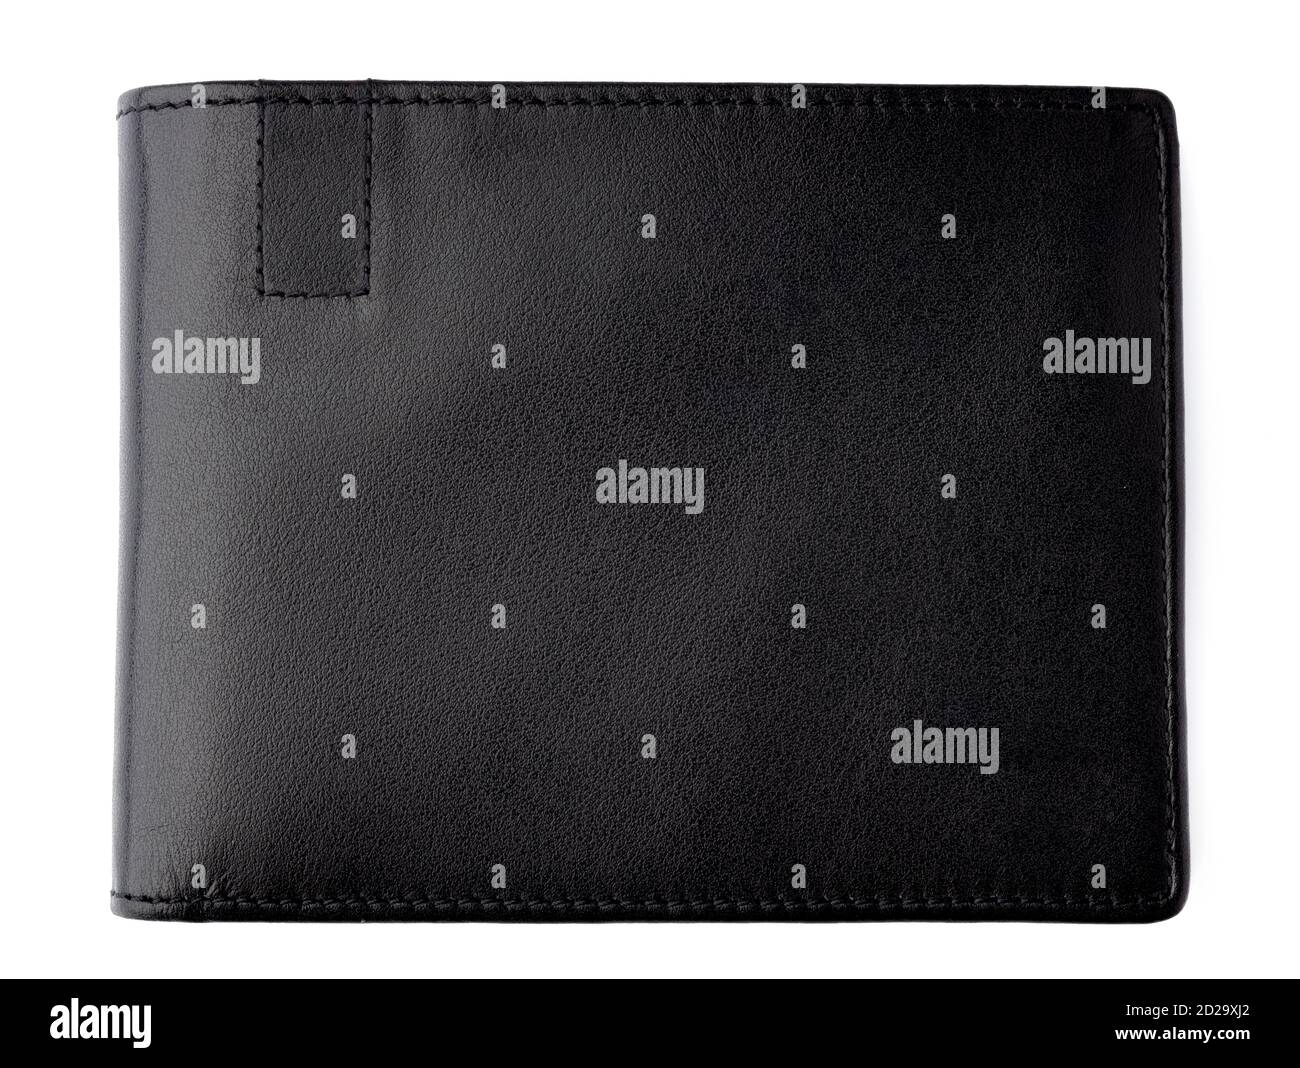 Black leather men purse isolated on a white background Stock Photo - Alamy